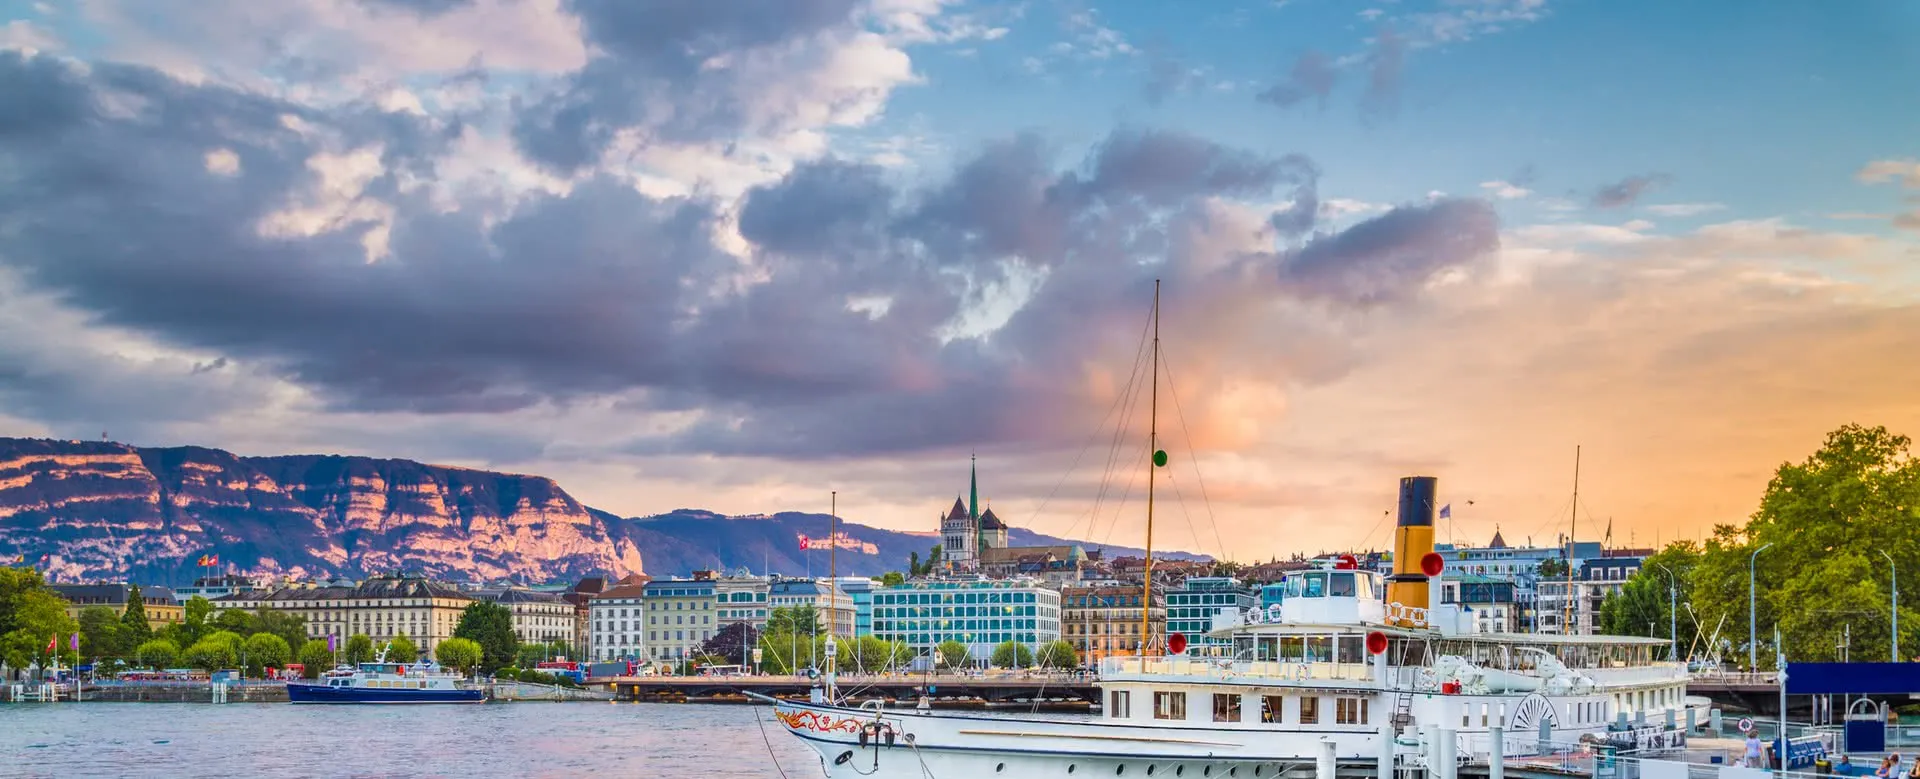 Geneva - the destination with good group discounts at hotels